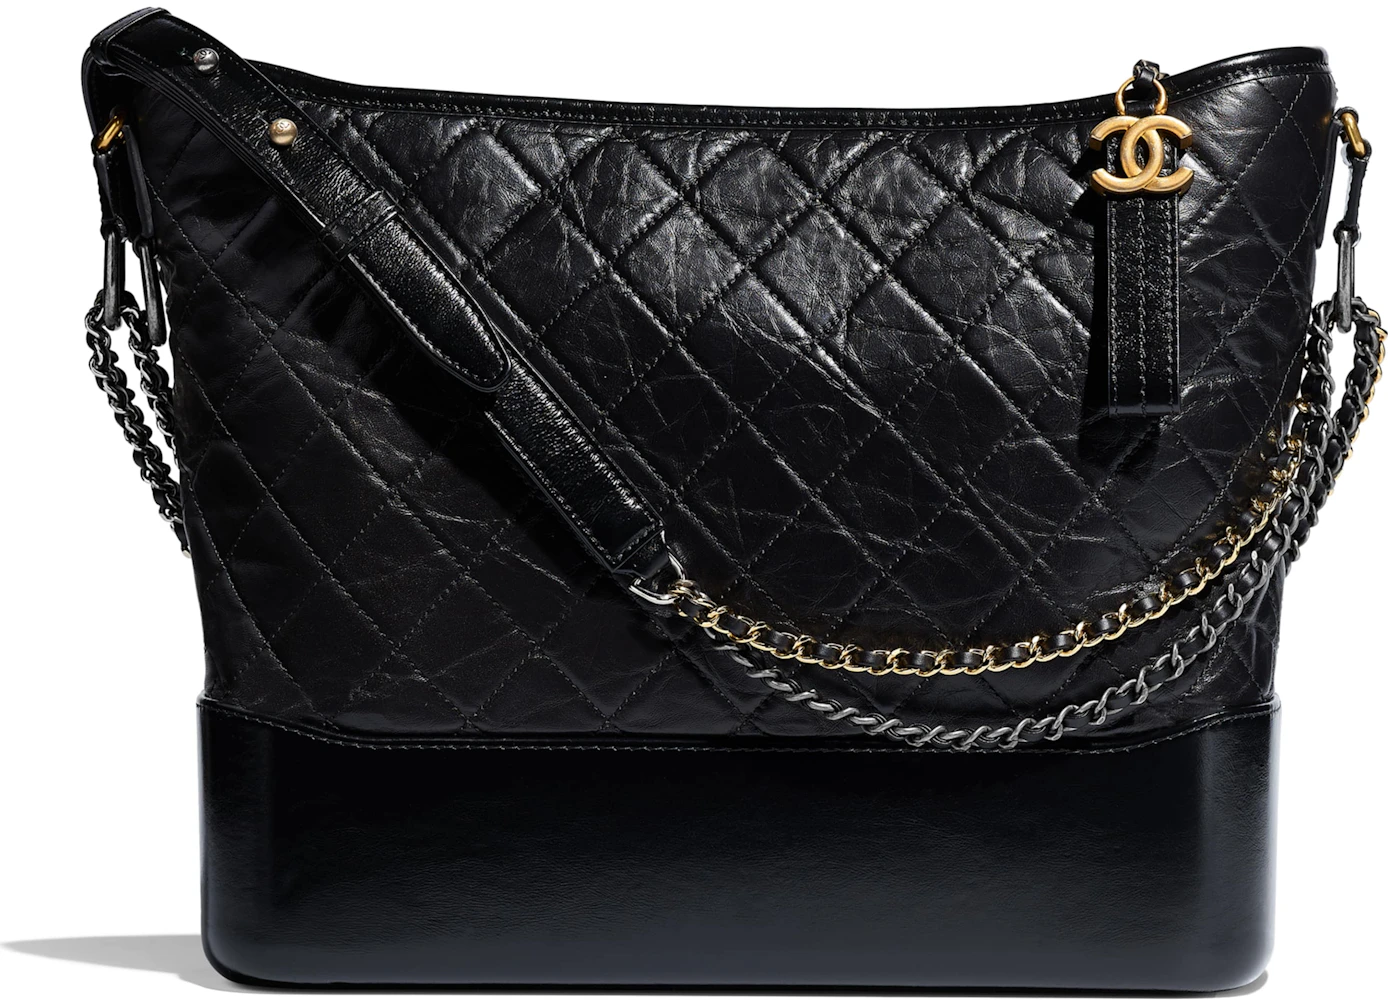 Chanel Gabrielle Hobo Bag Large Black in Calfskin with Silver/Gold